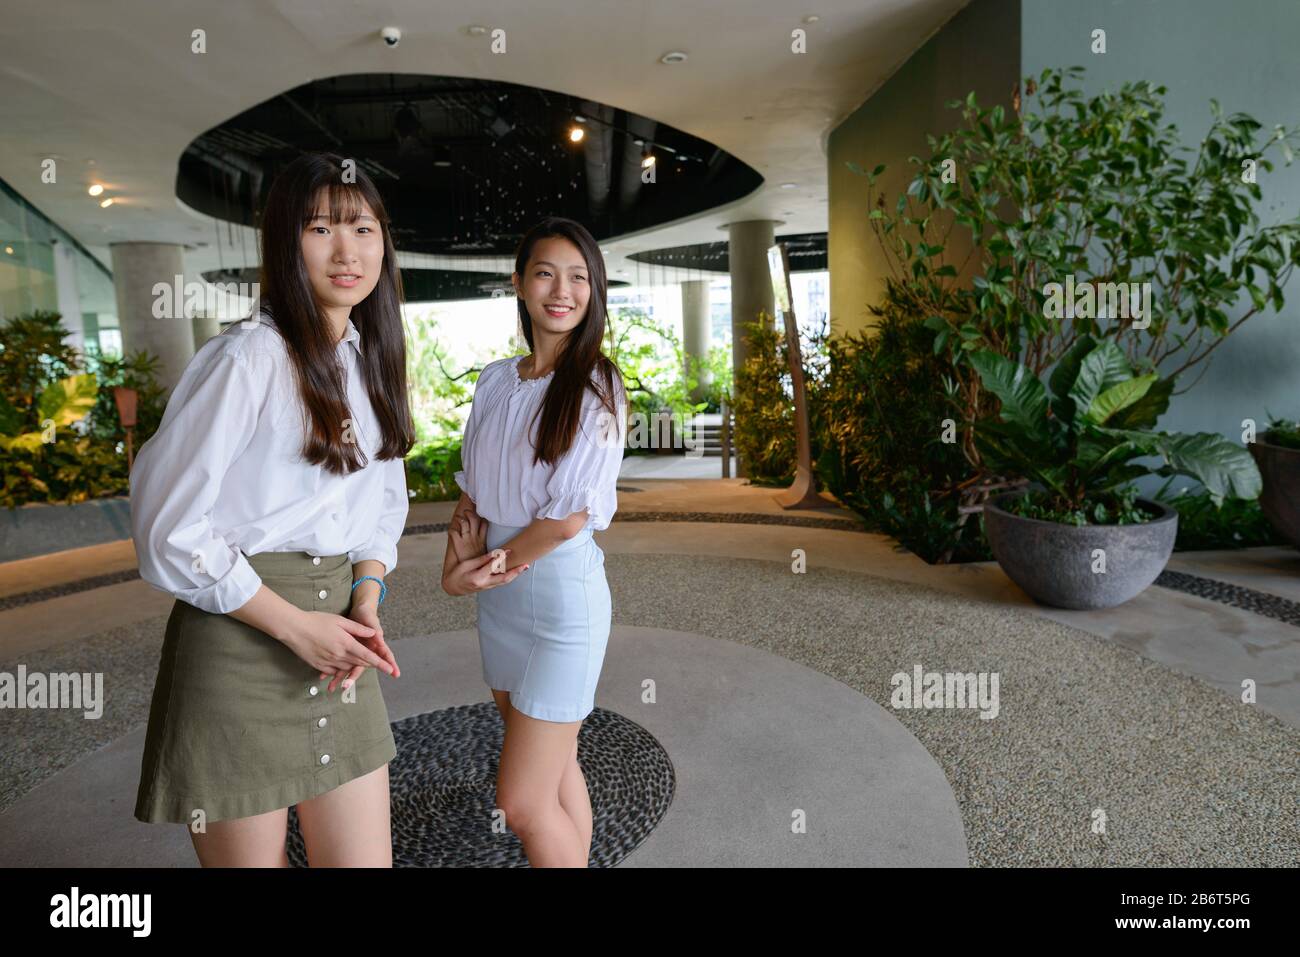 Two happy young beautiful Asian teenage girls together at the indoor garden Stock Photo